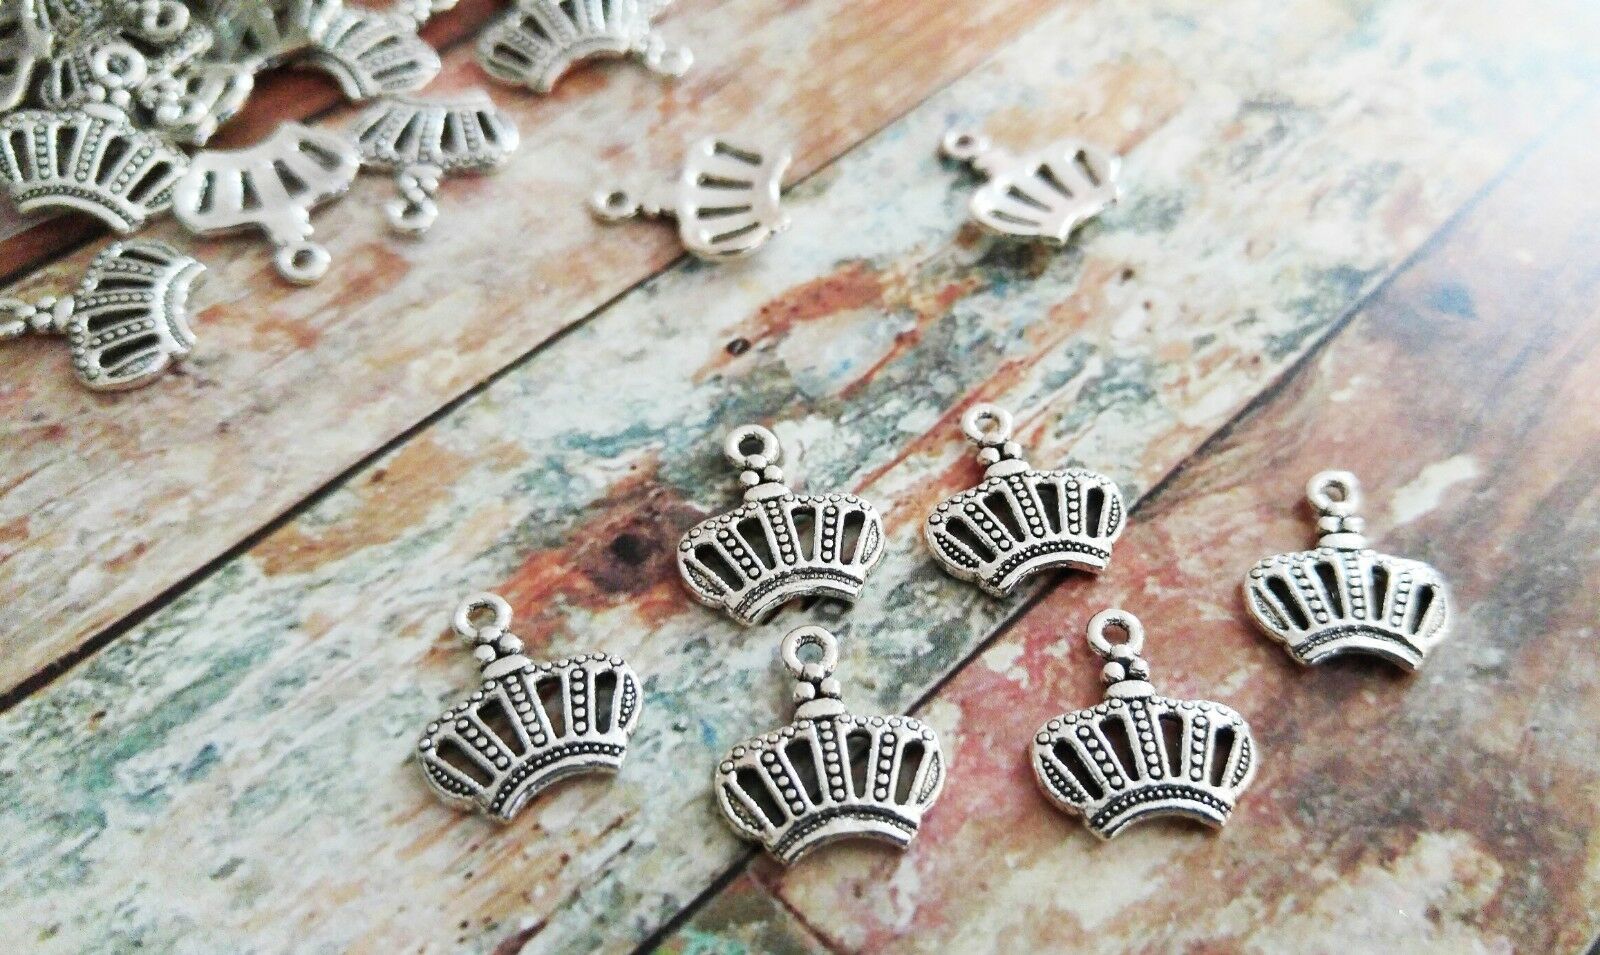 The Slippery Pearl - 10 crown jewelry charms queen pendants antique silver tone alice in wonderland